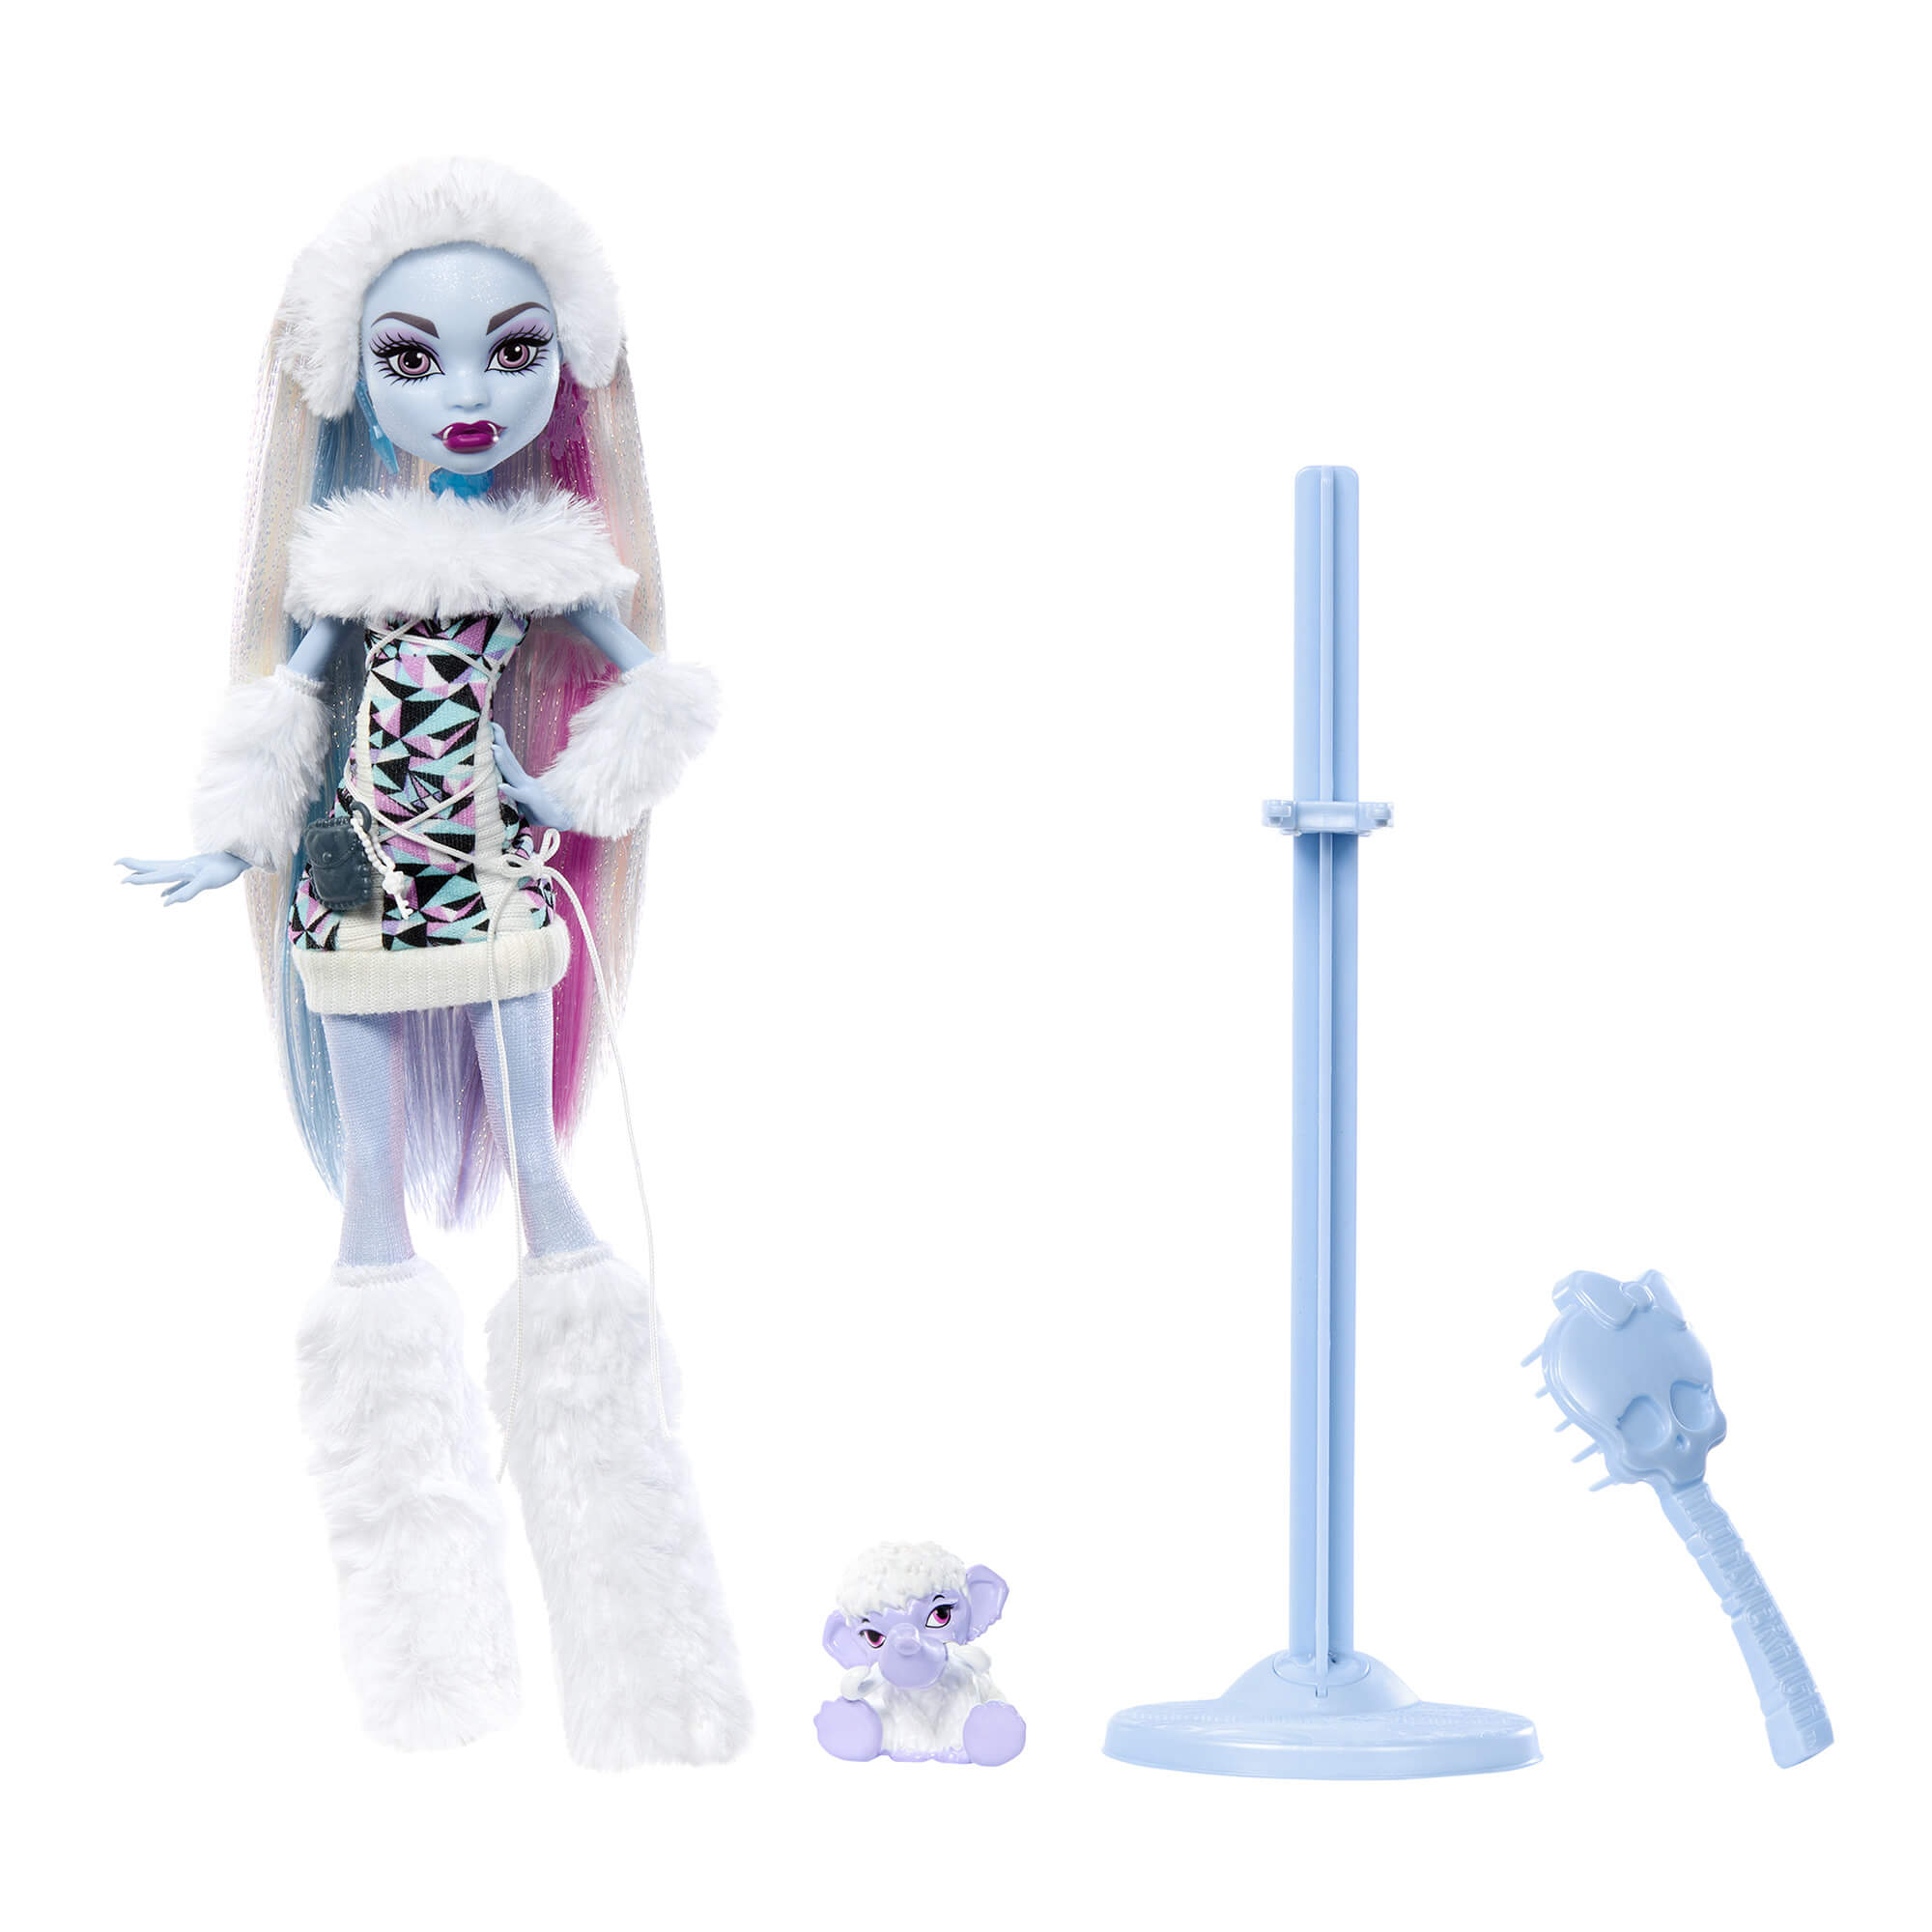 Monster High Boo-riginal Creeproduction G1 Abbey Bominable Doll